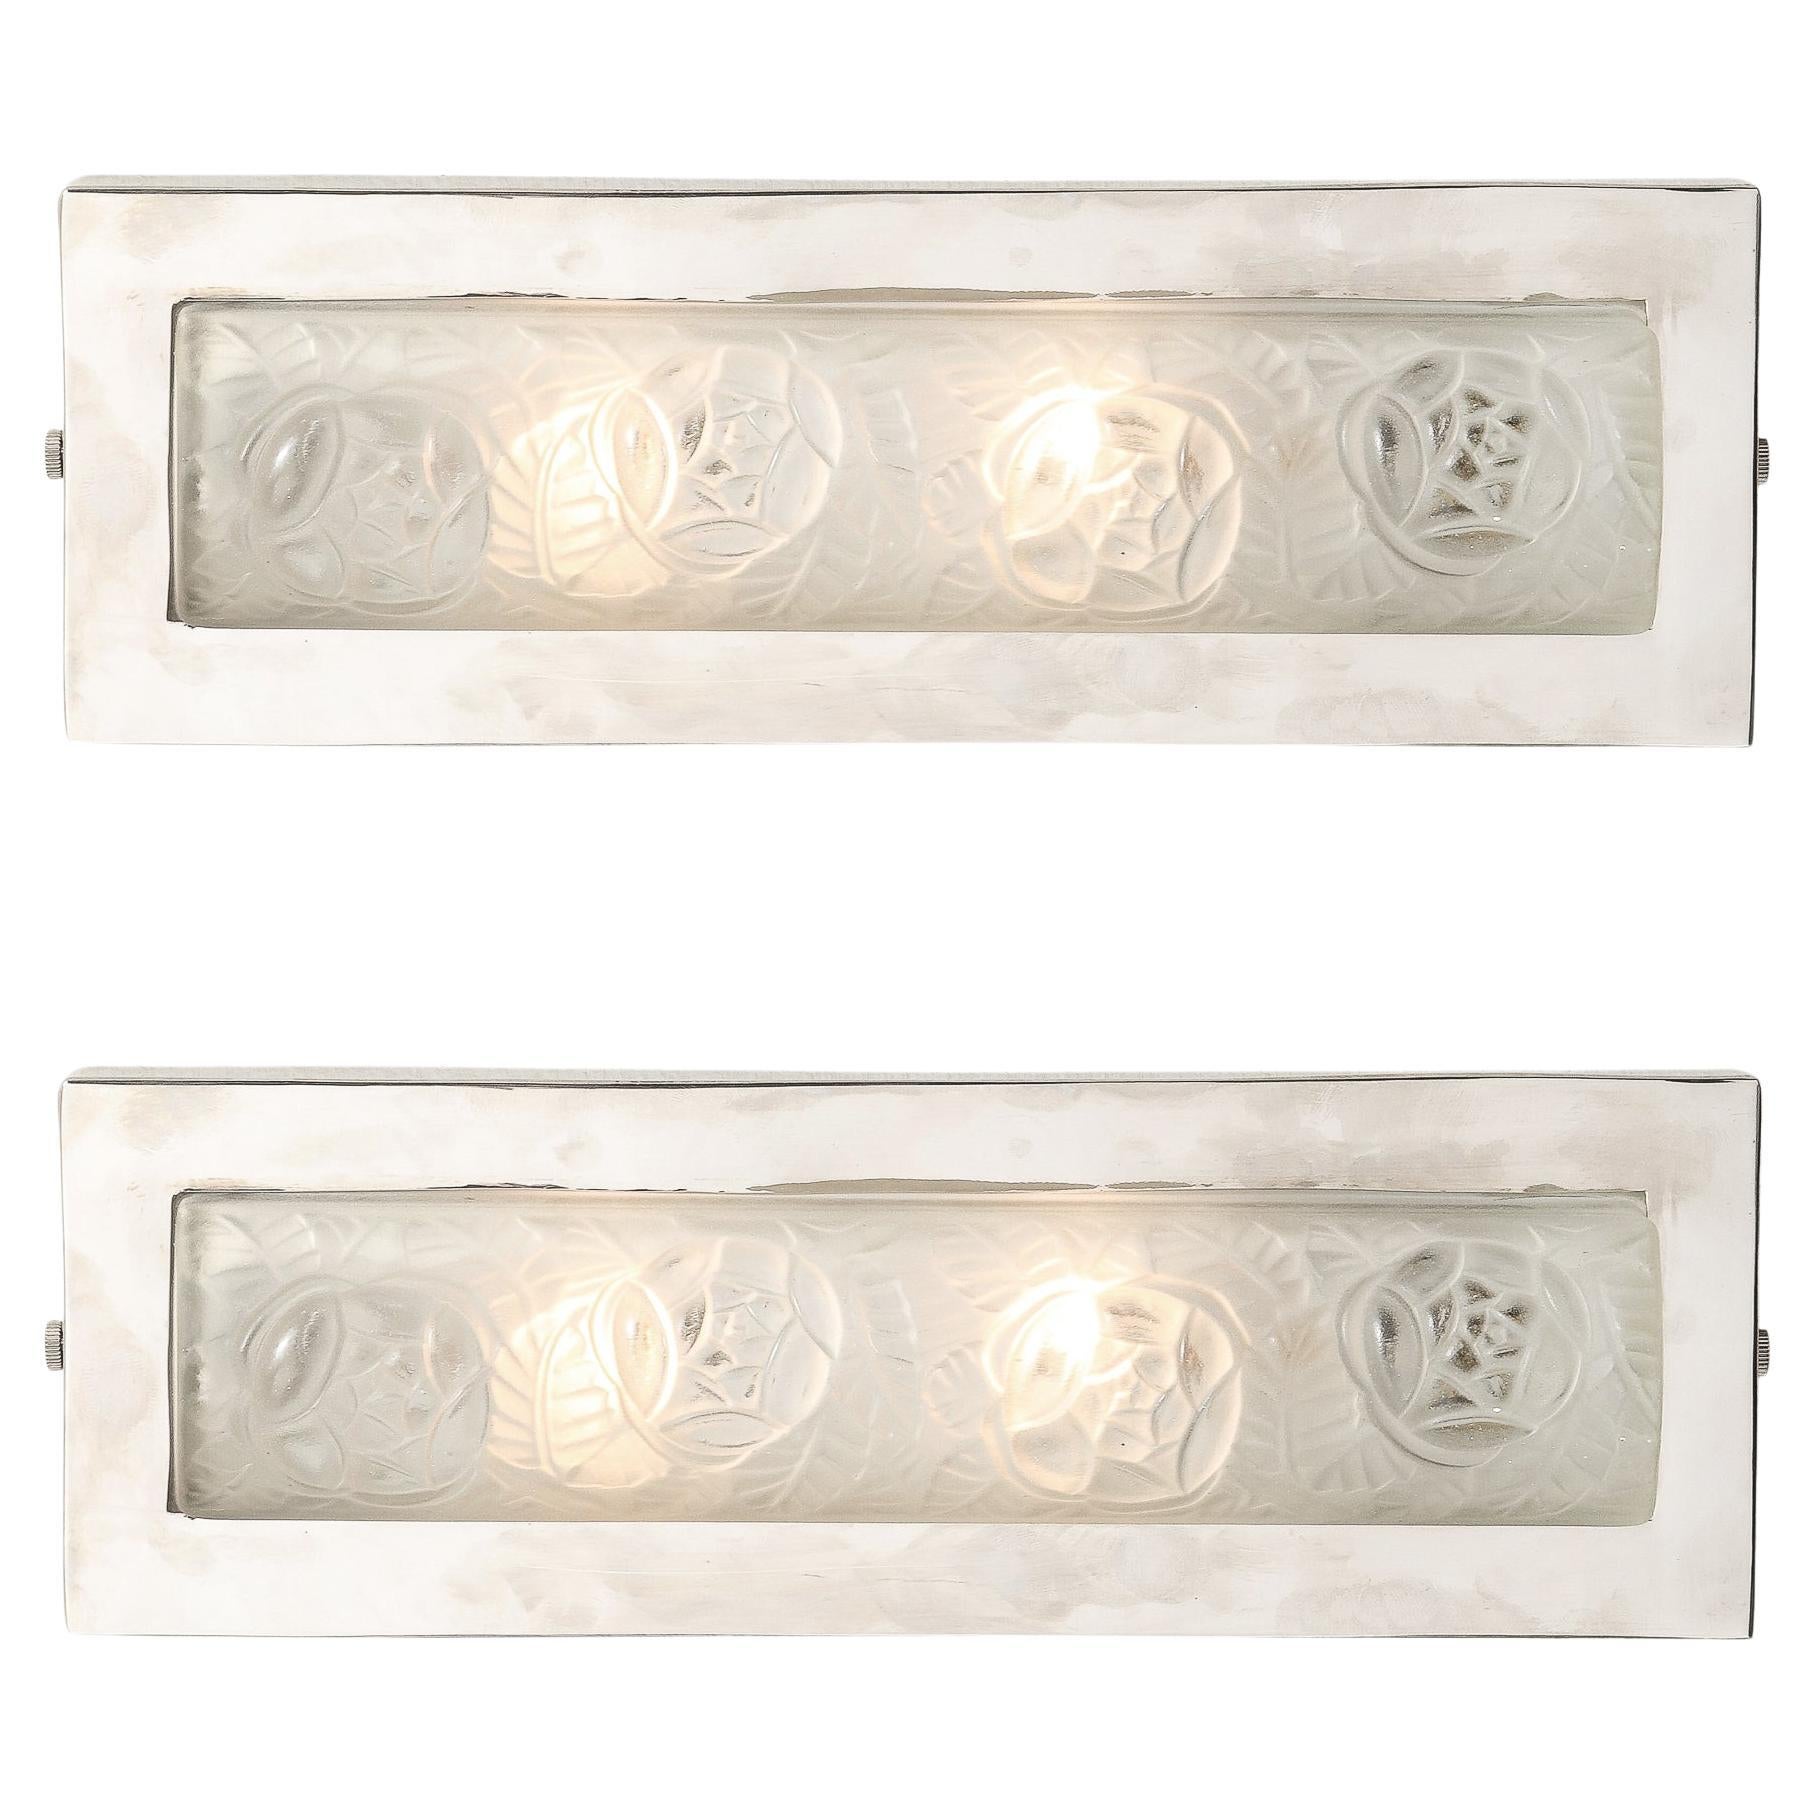 Pair of Art Deco Frosted Glass & Chrome Rectangular Vanity Lights W/ Rose Motifs For Sale